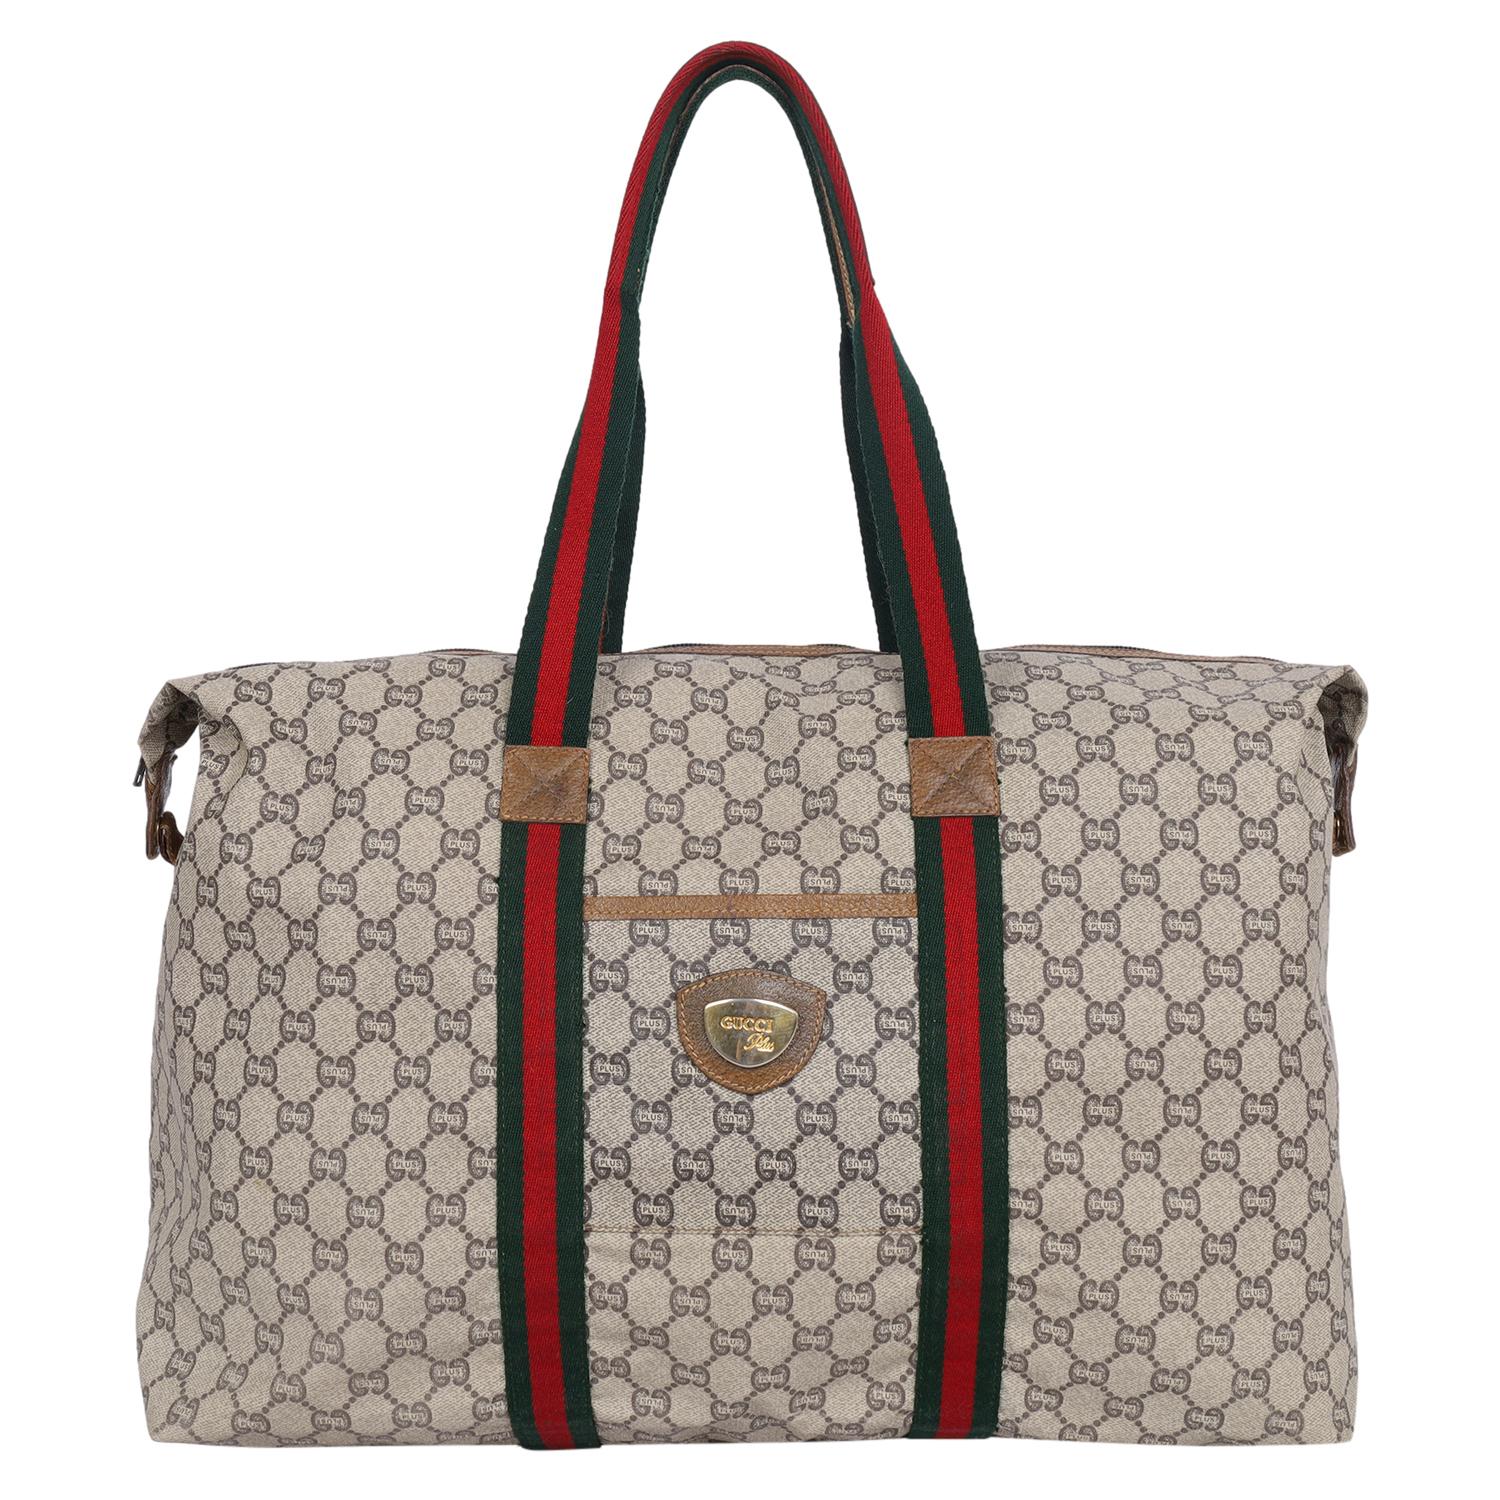 Gucci GG Monogram Canvas Shoulder Bag Tote In Fair Condition In Salt Lake Cty, UT